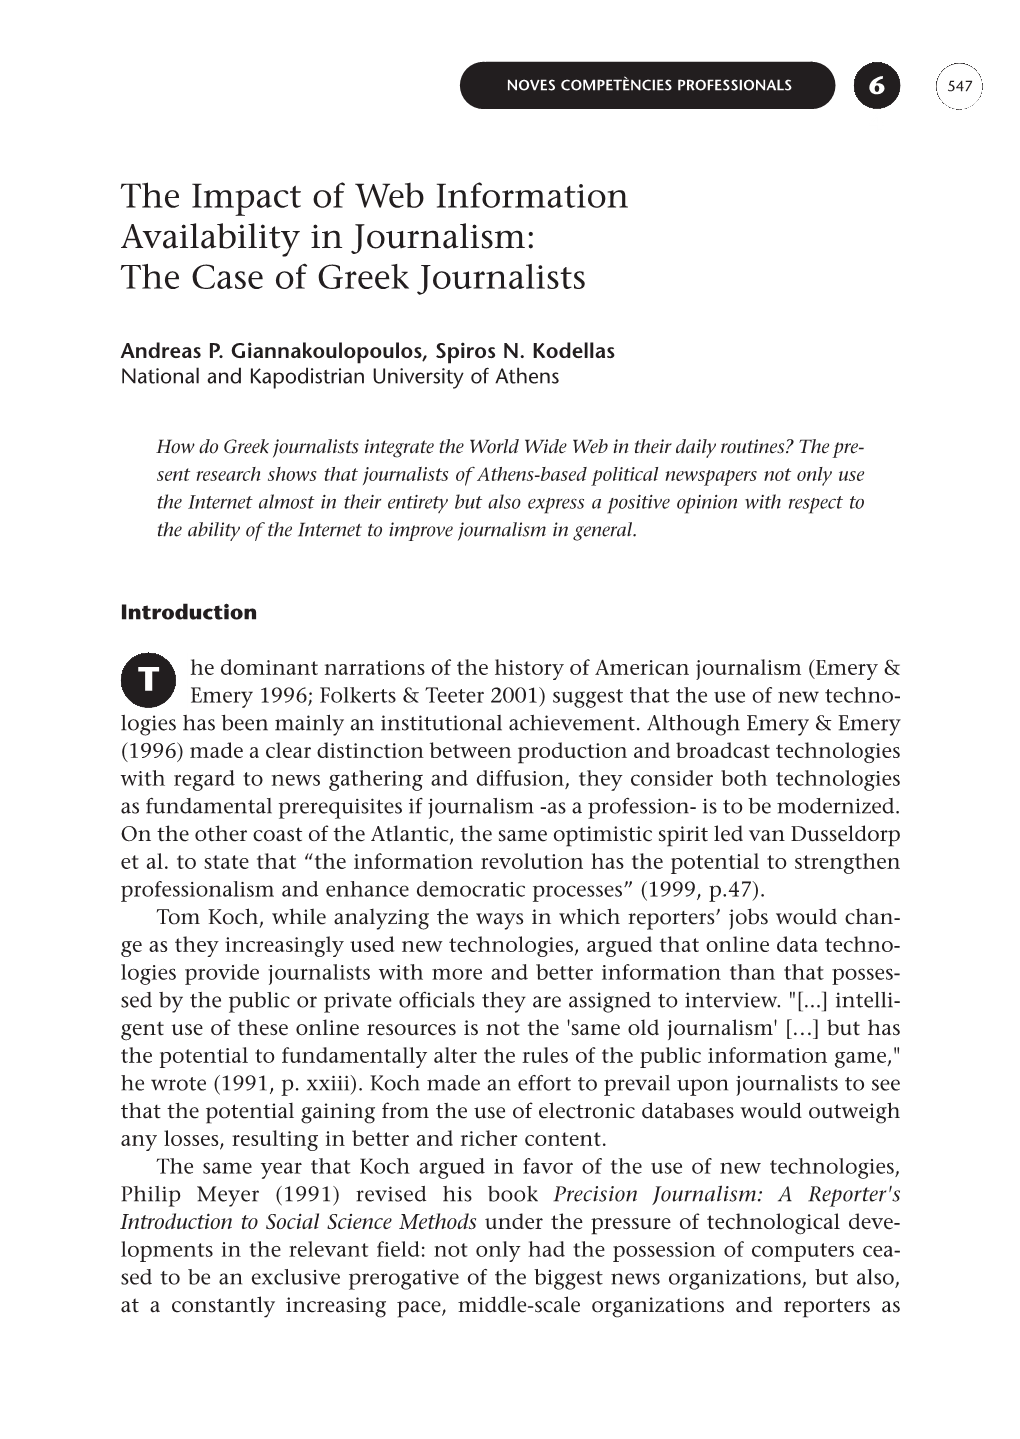 The Impact of Web Information Availability in Journalism: the Case of Greek Journalists